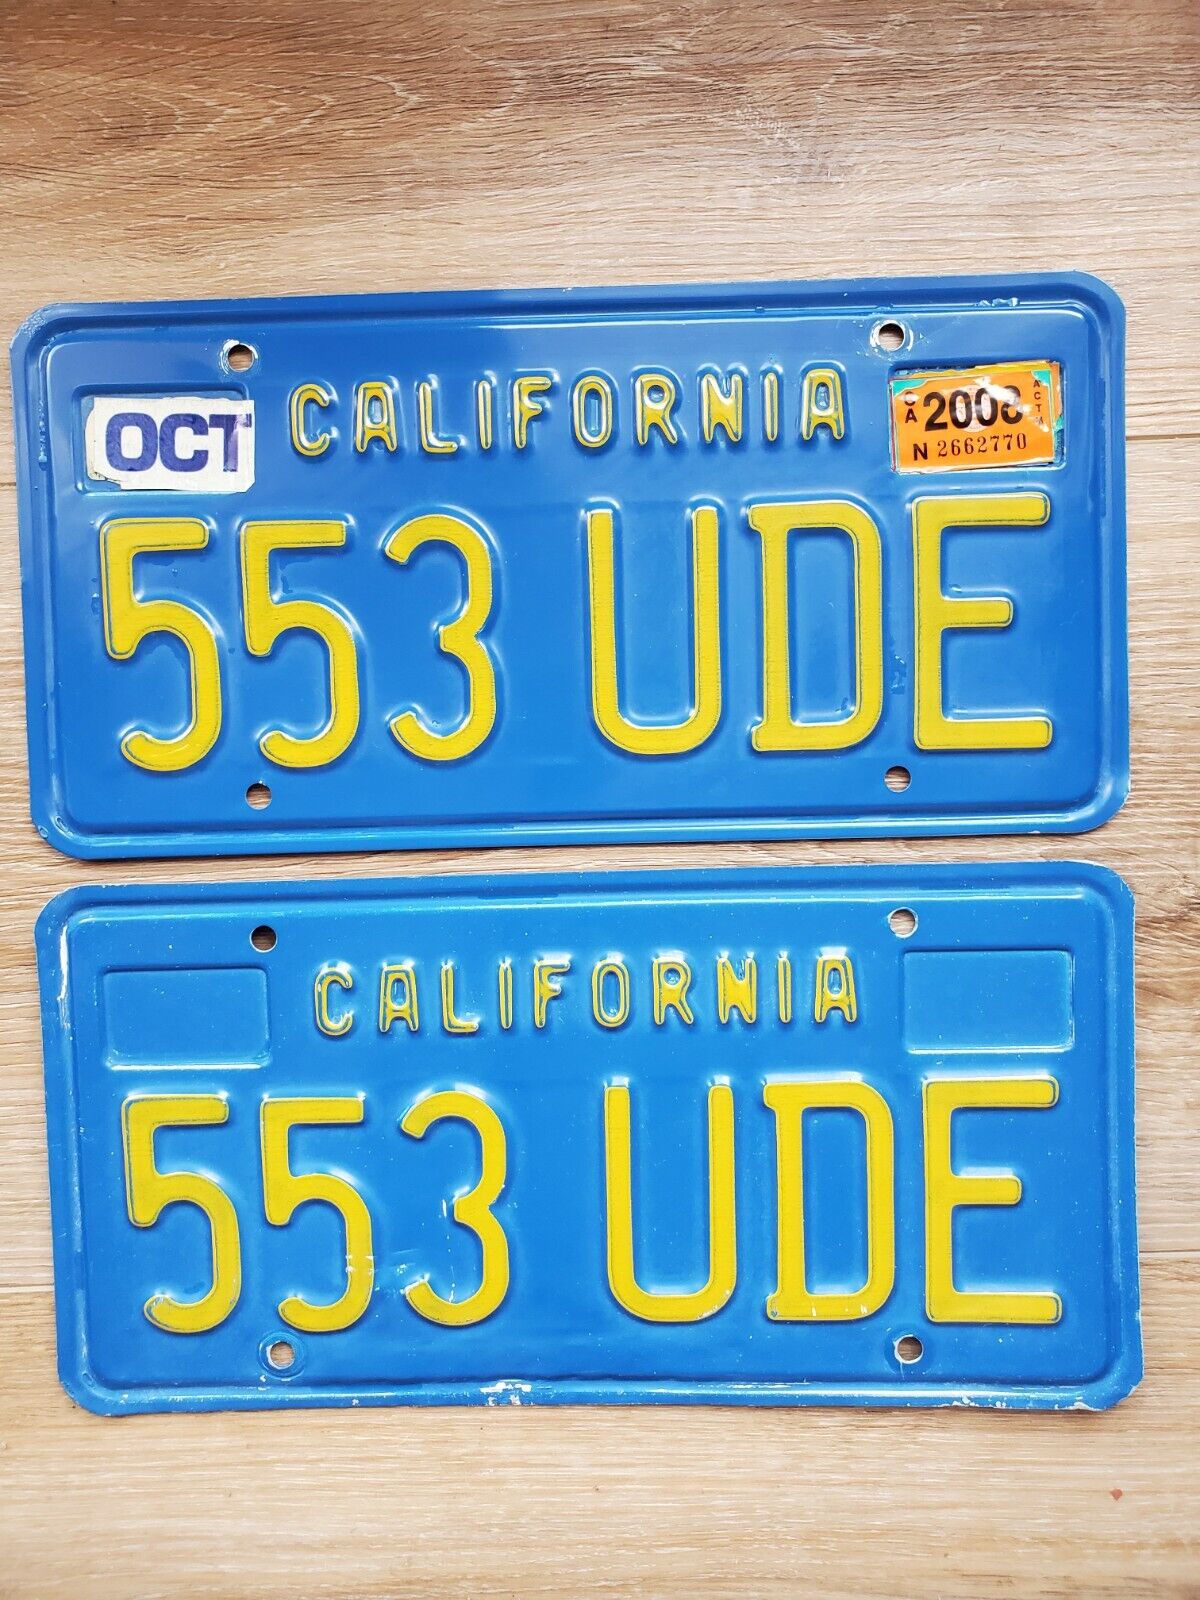 1970s 80s California CA Blue License Plates Unrestored - PAIR “553 UDE” Cleared